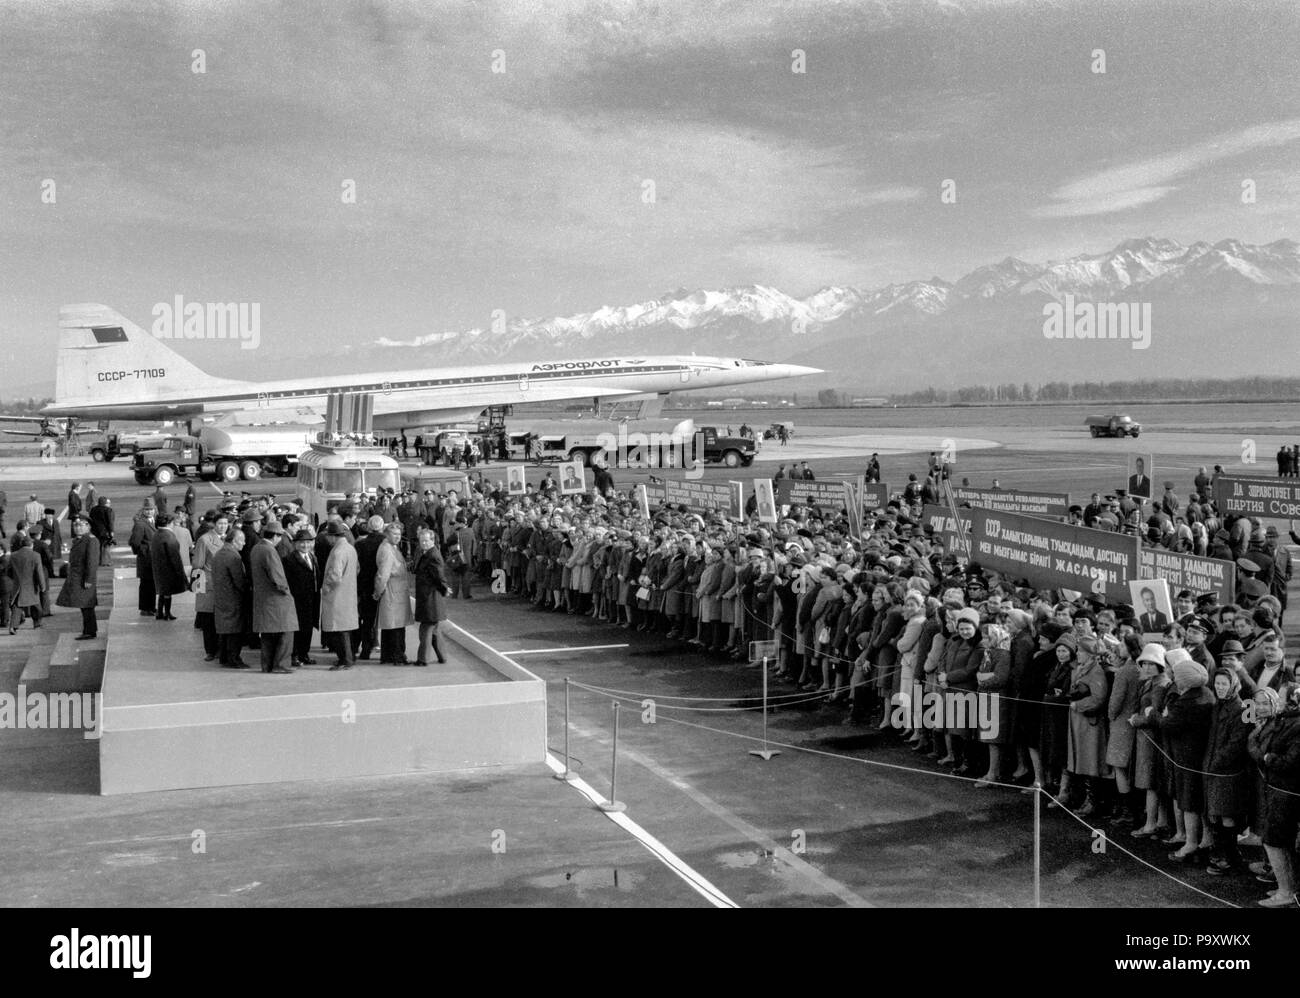 The Tupolev Tu-144 supersonic jet airplane of Aeroflot Soviet Airlines pictured during a welcome communist meeting dedicated to the first passenger fl Stock Photo